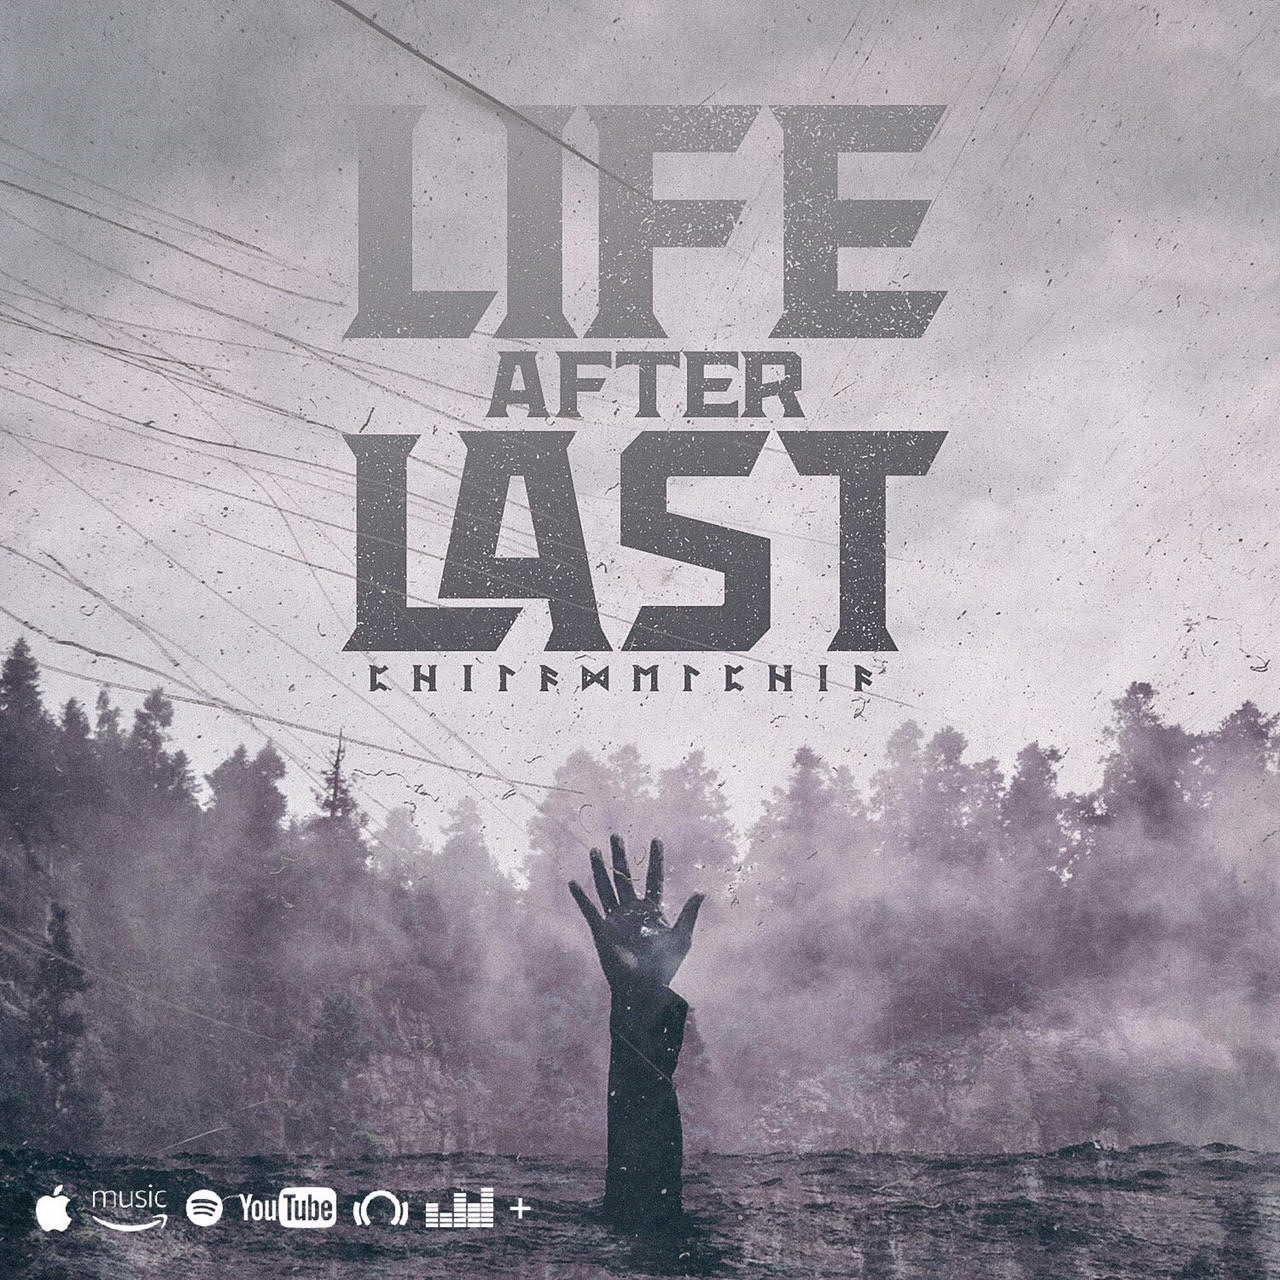 Ласт лайф. Life after. Лиф Афтер. Автор Лайфа. Life after Life.